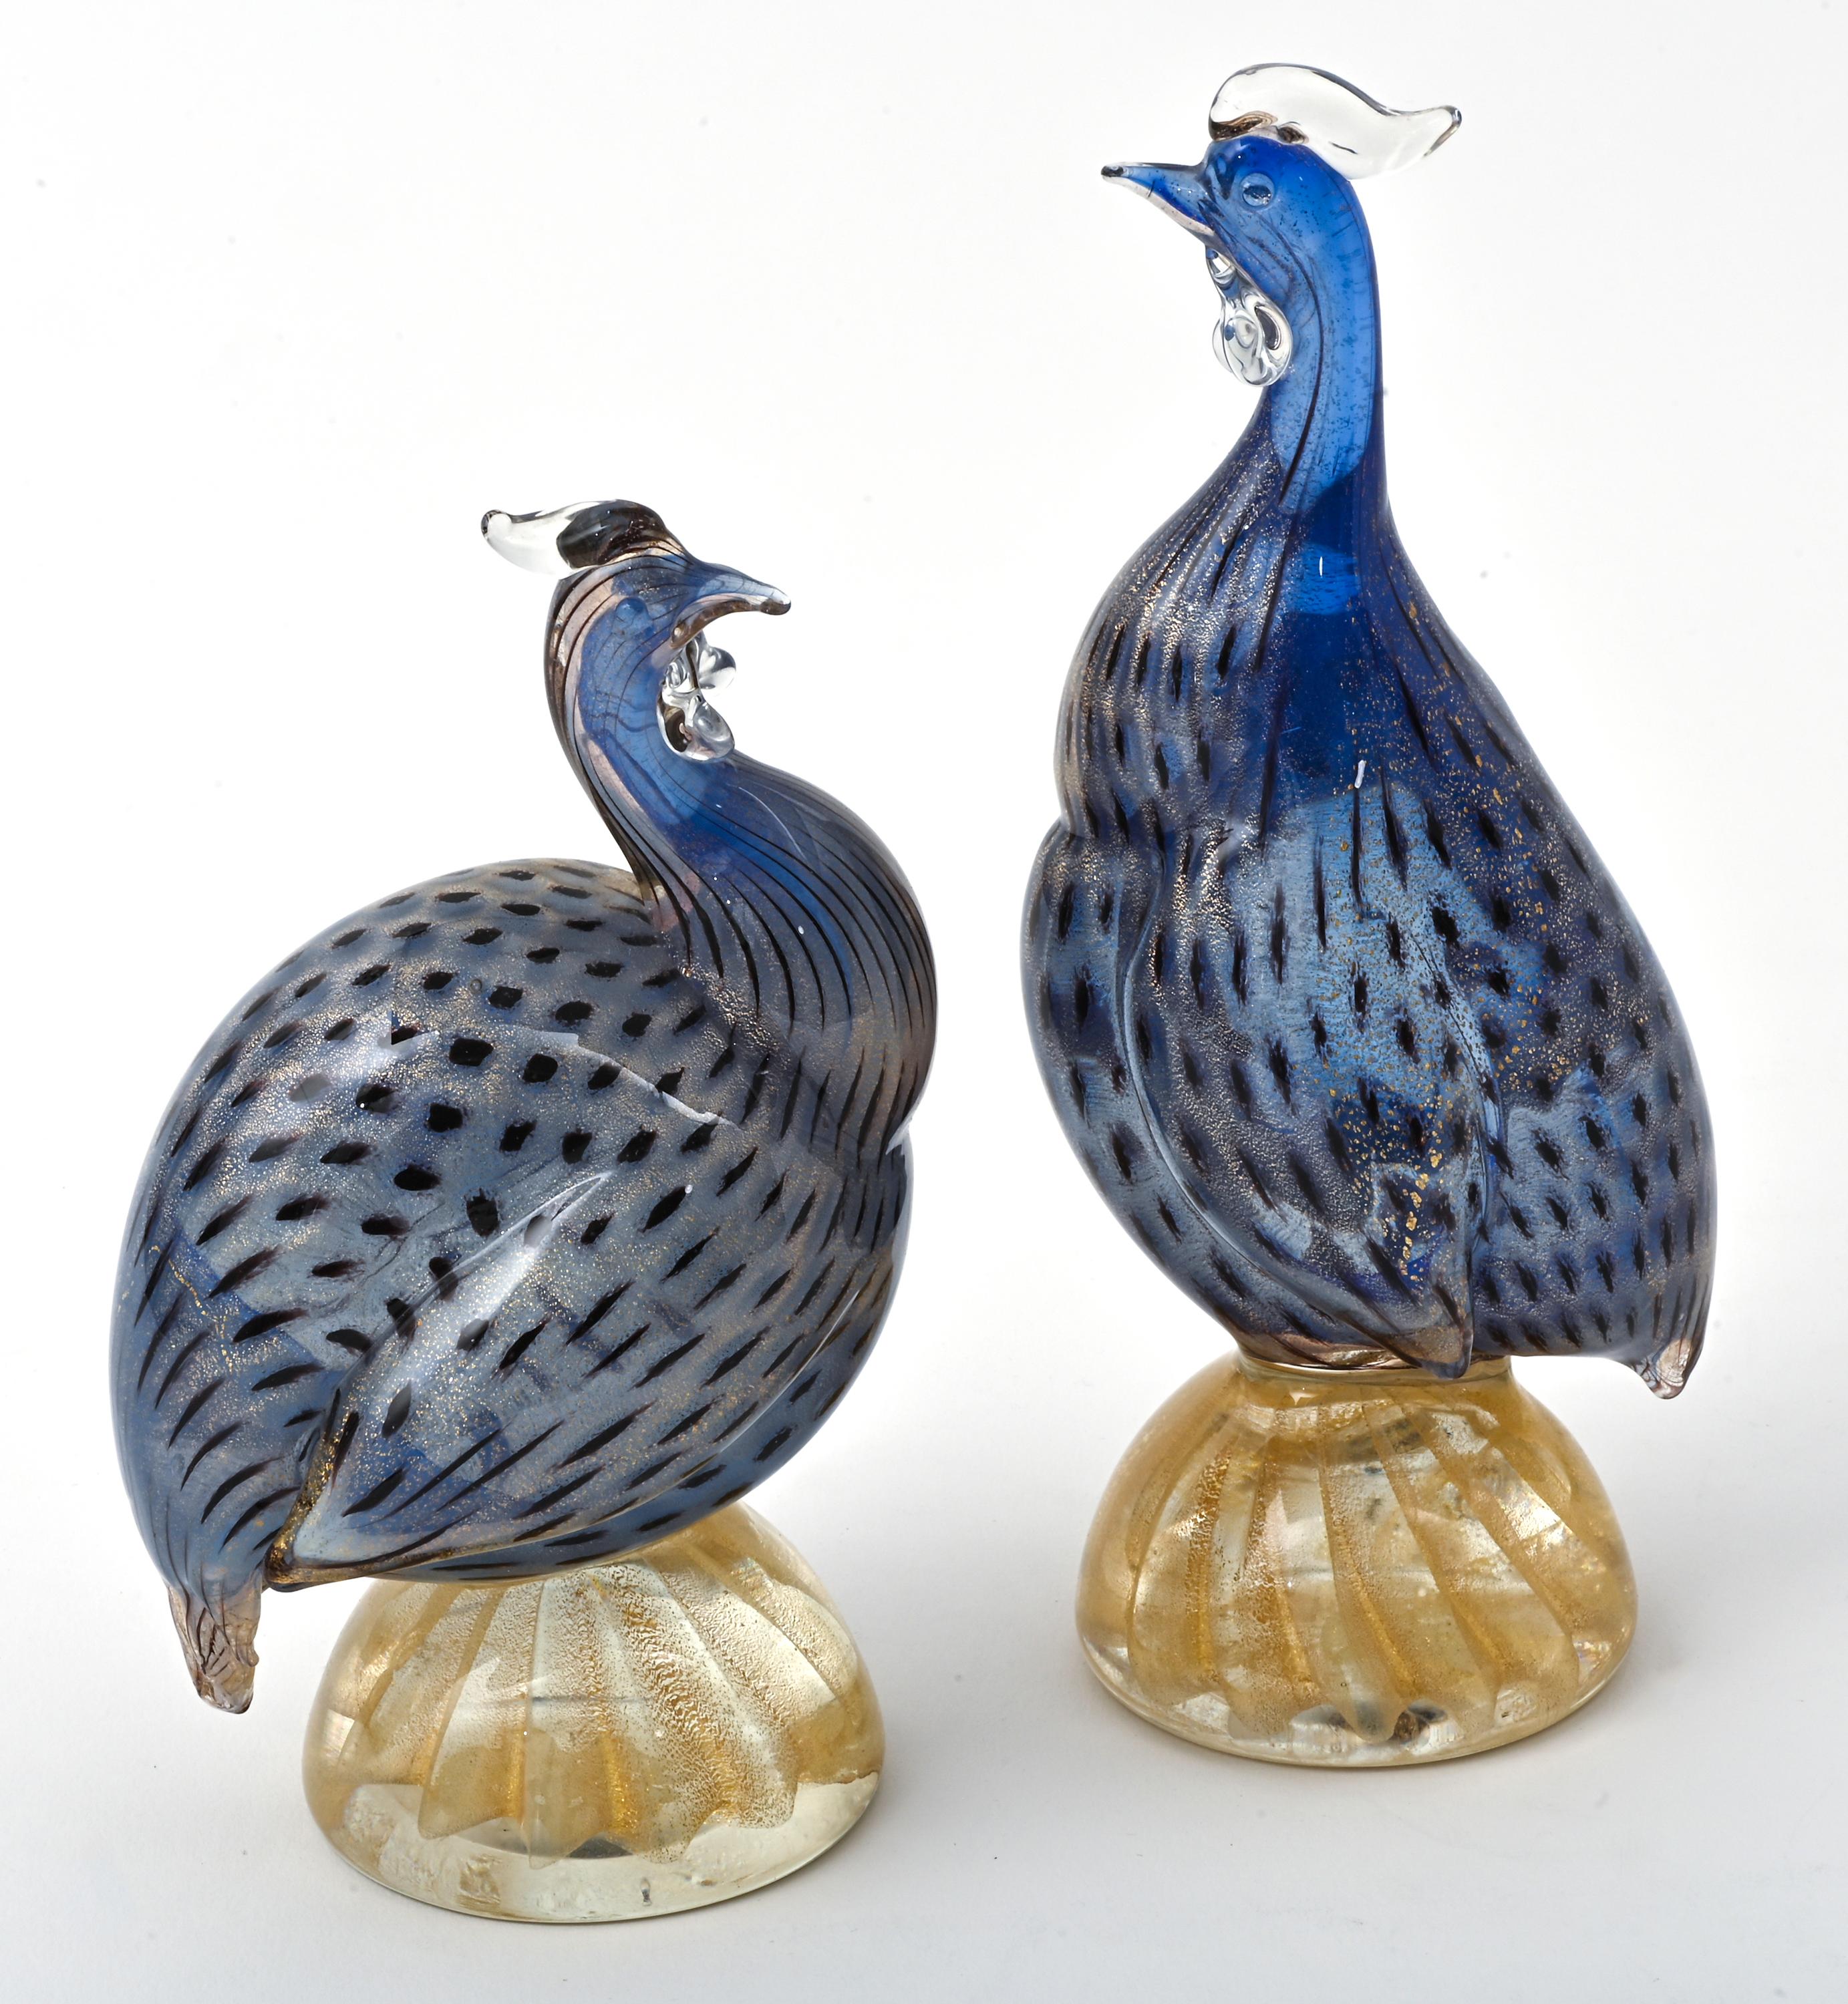 Beautiful pair of Italian Murano glass guinea hen birds. Beautiful coloration in blue and gold flecks infused into the glass. Very good condition.